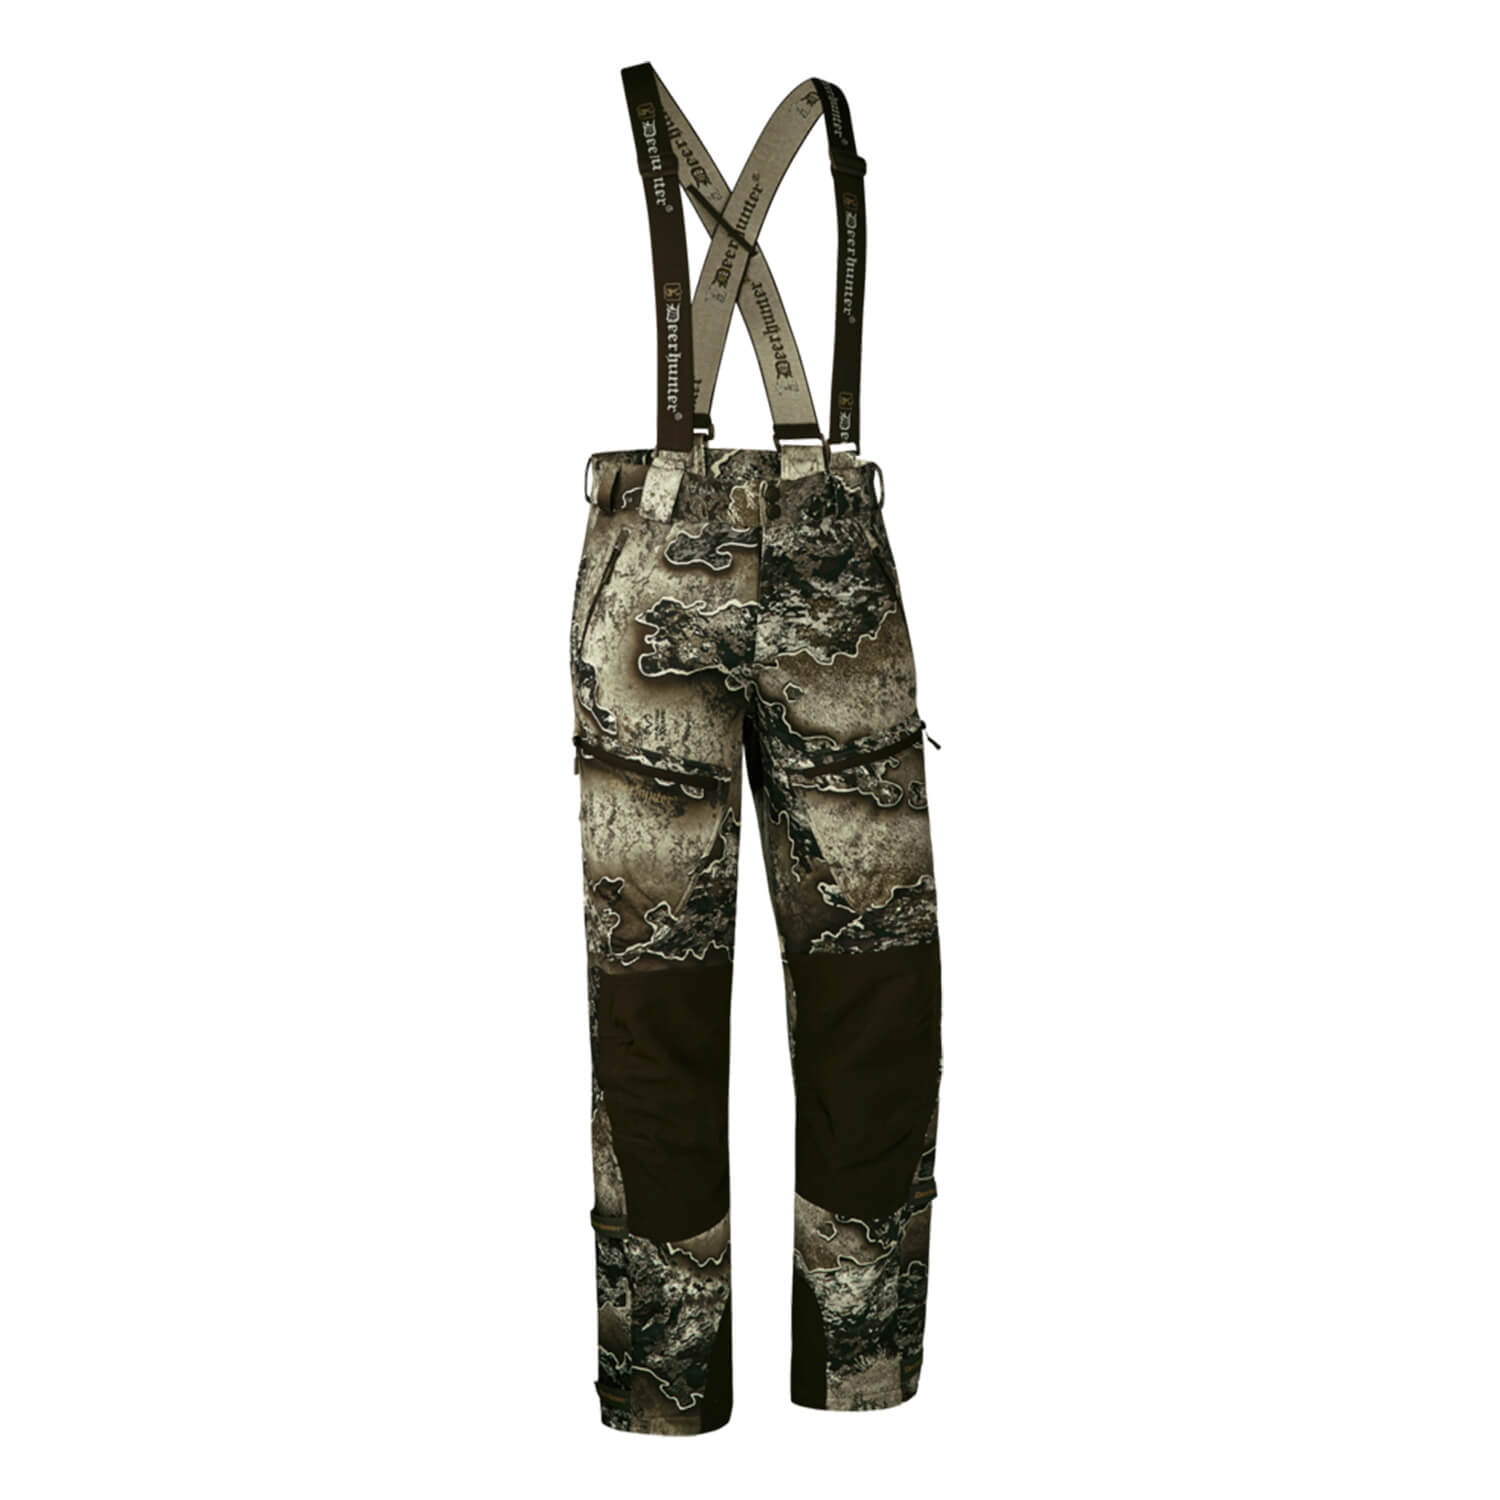 Deerhunter Softshell Trousers Excape Light (Realtree Excape) - Camouflage Trousers